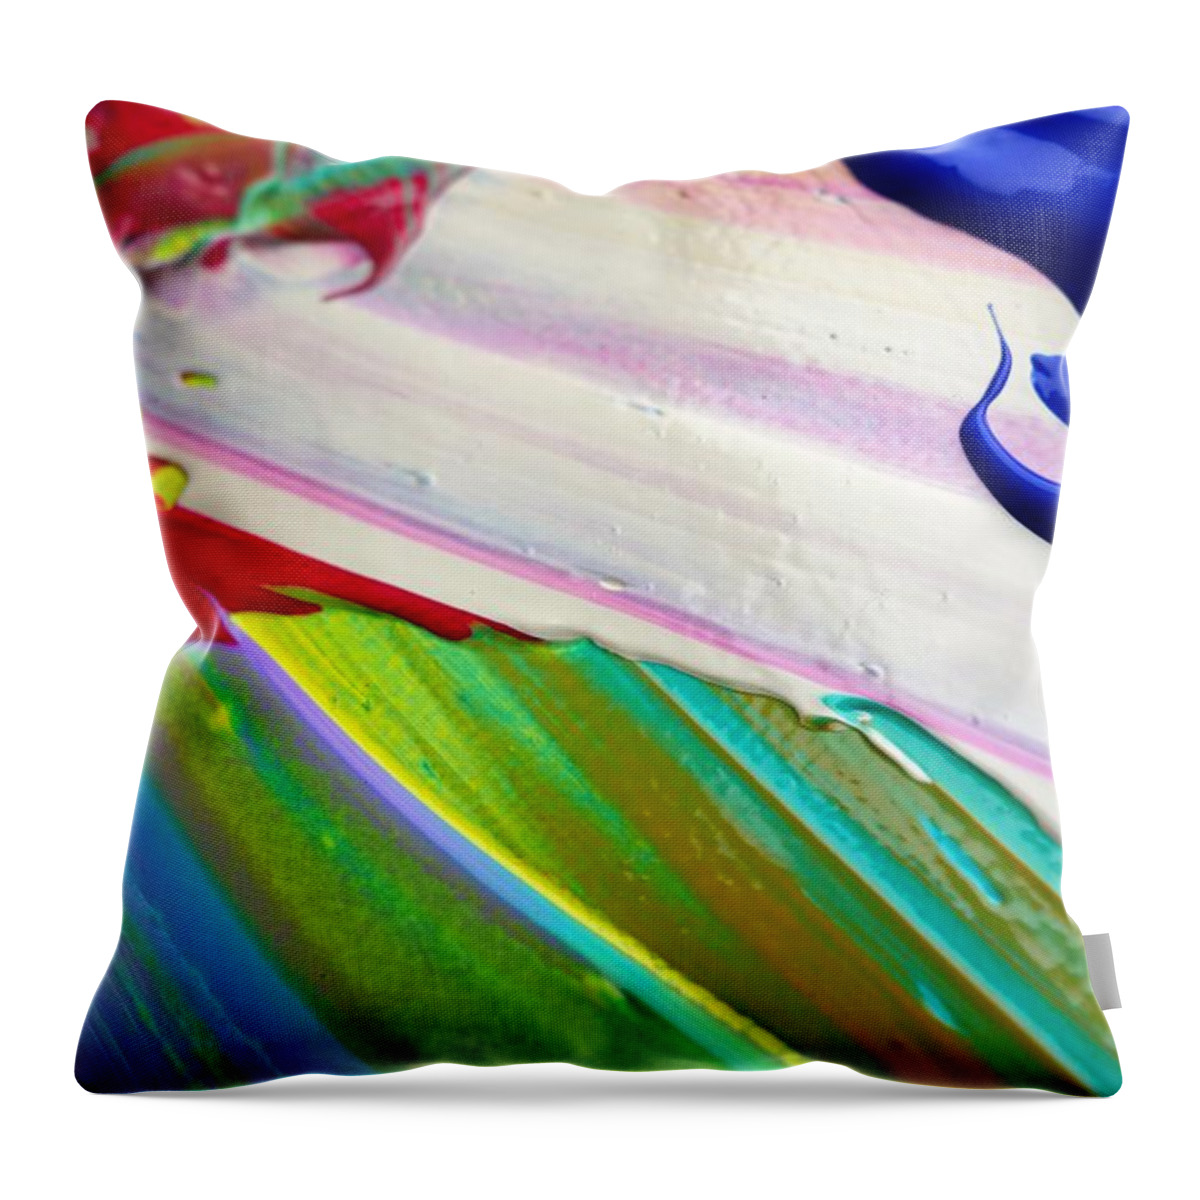 Paint Throw Pillow featuring the photograph Wet Paint 34 by Jacqueline Athmann